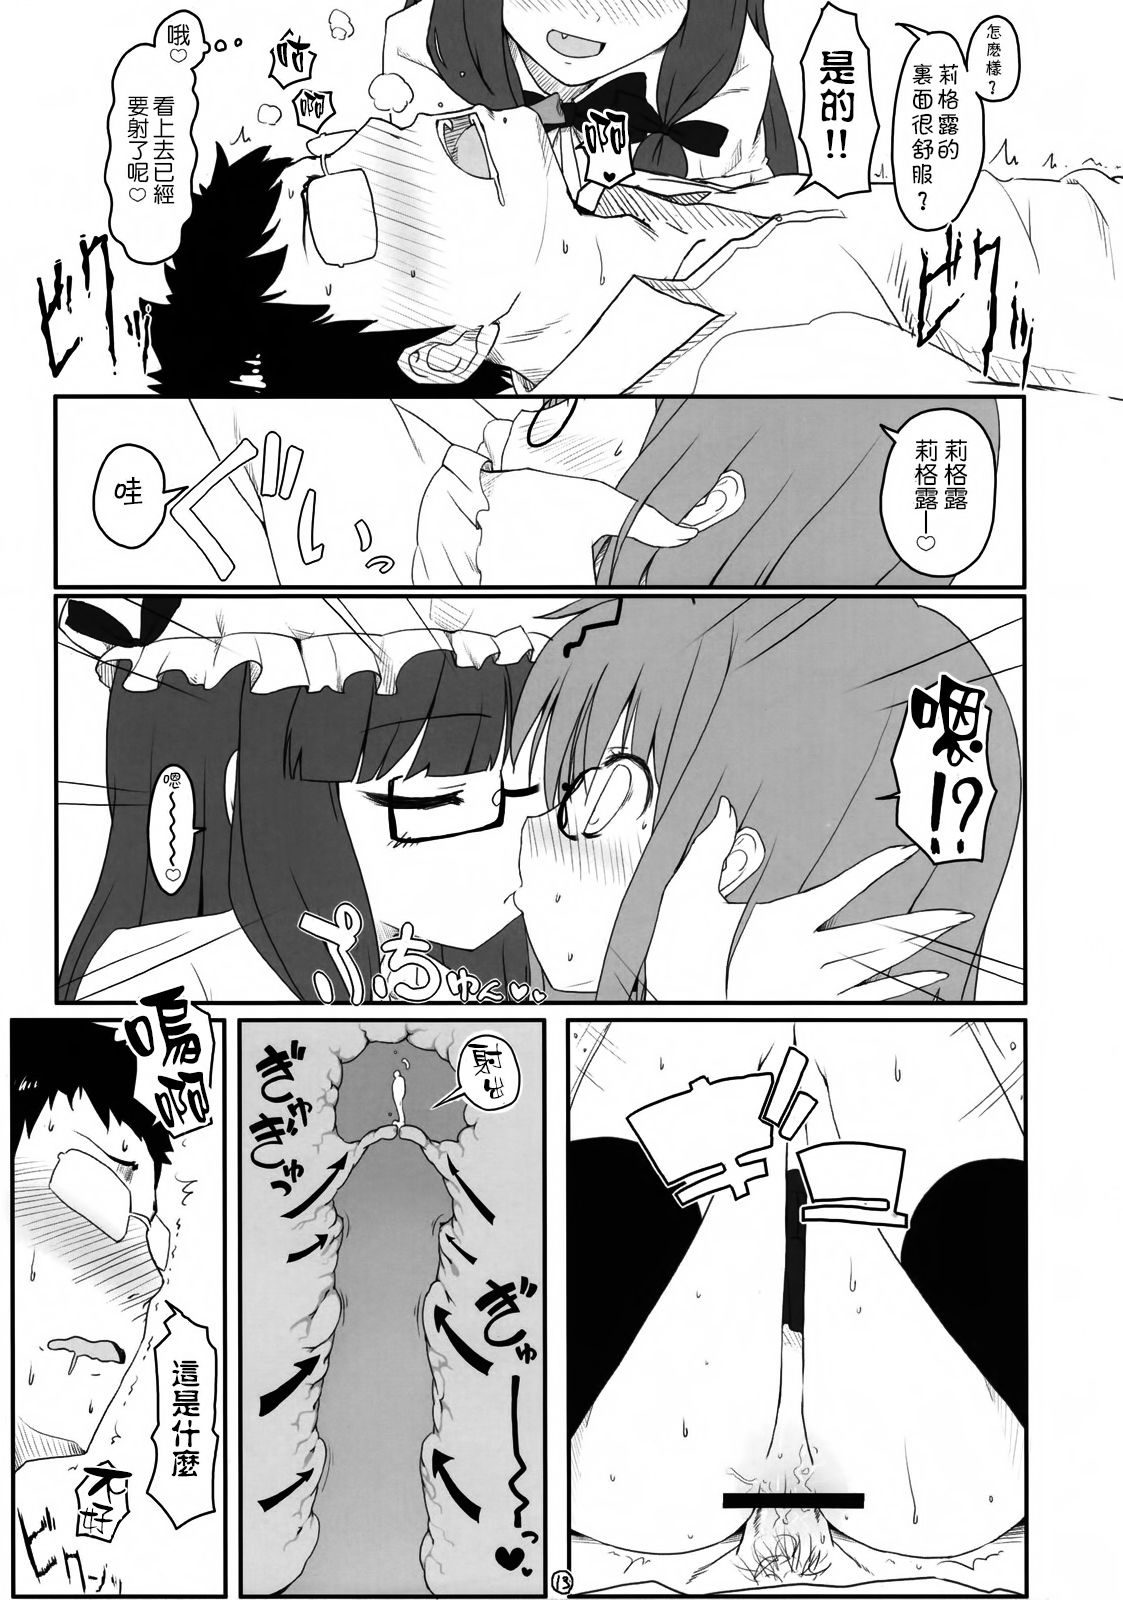 (C75) [Itou Life] Touhou Megane (Touhou Project) [Chinese] [无毒汉化组] (C75) [伊東ライフ] 東方眼鏡 (東方Project) [中文翻譯]